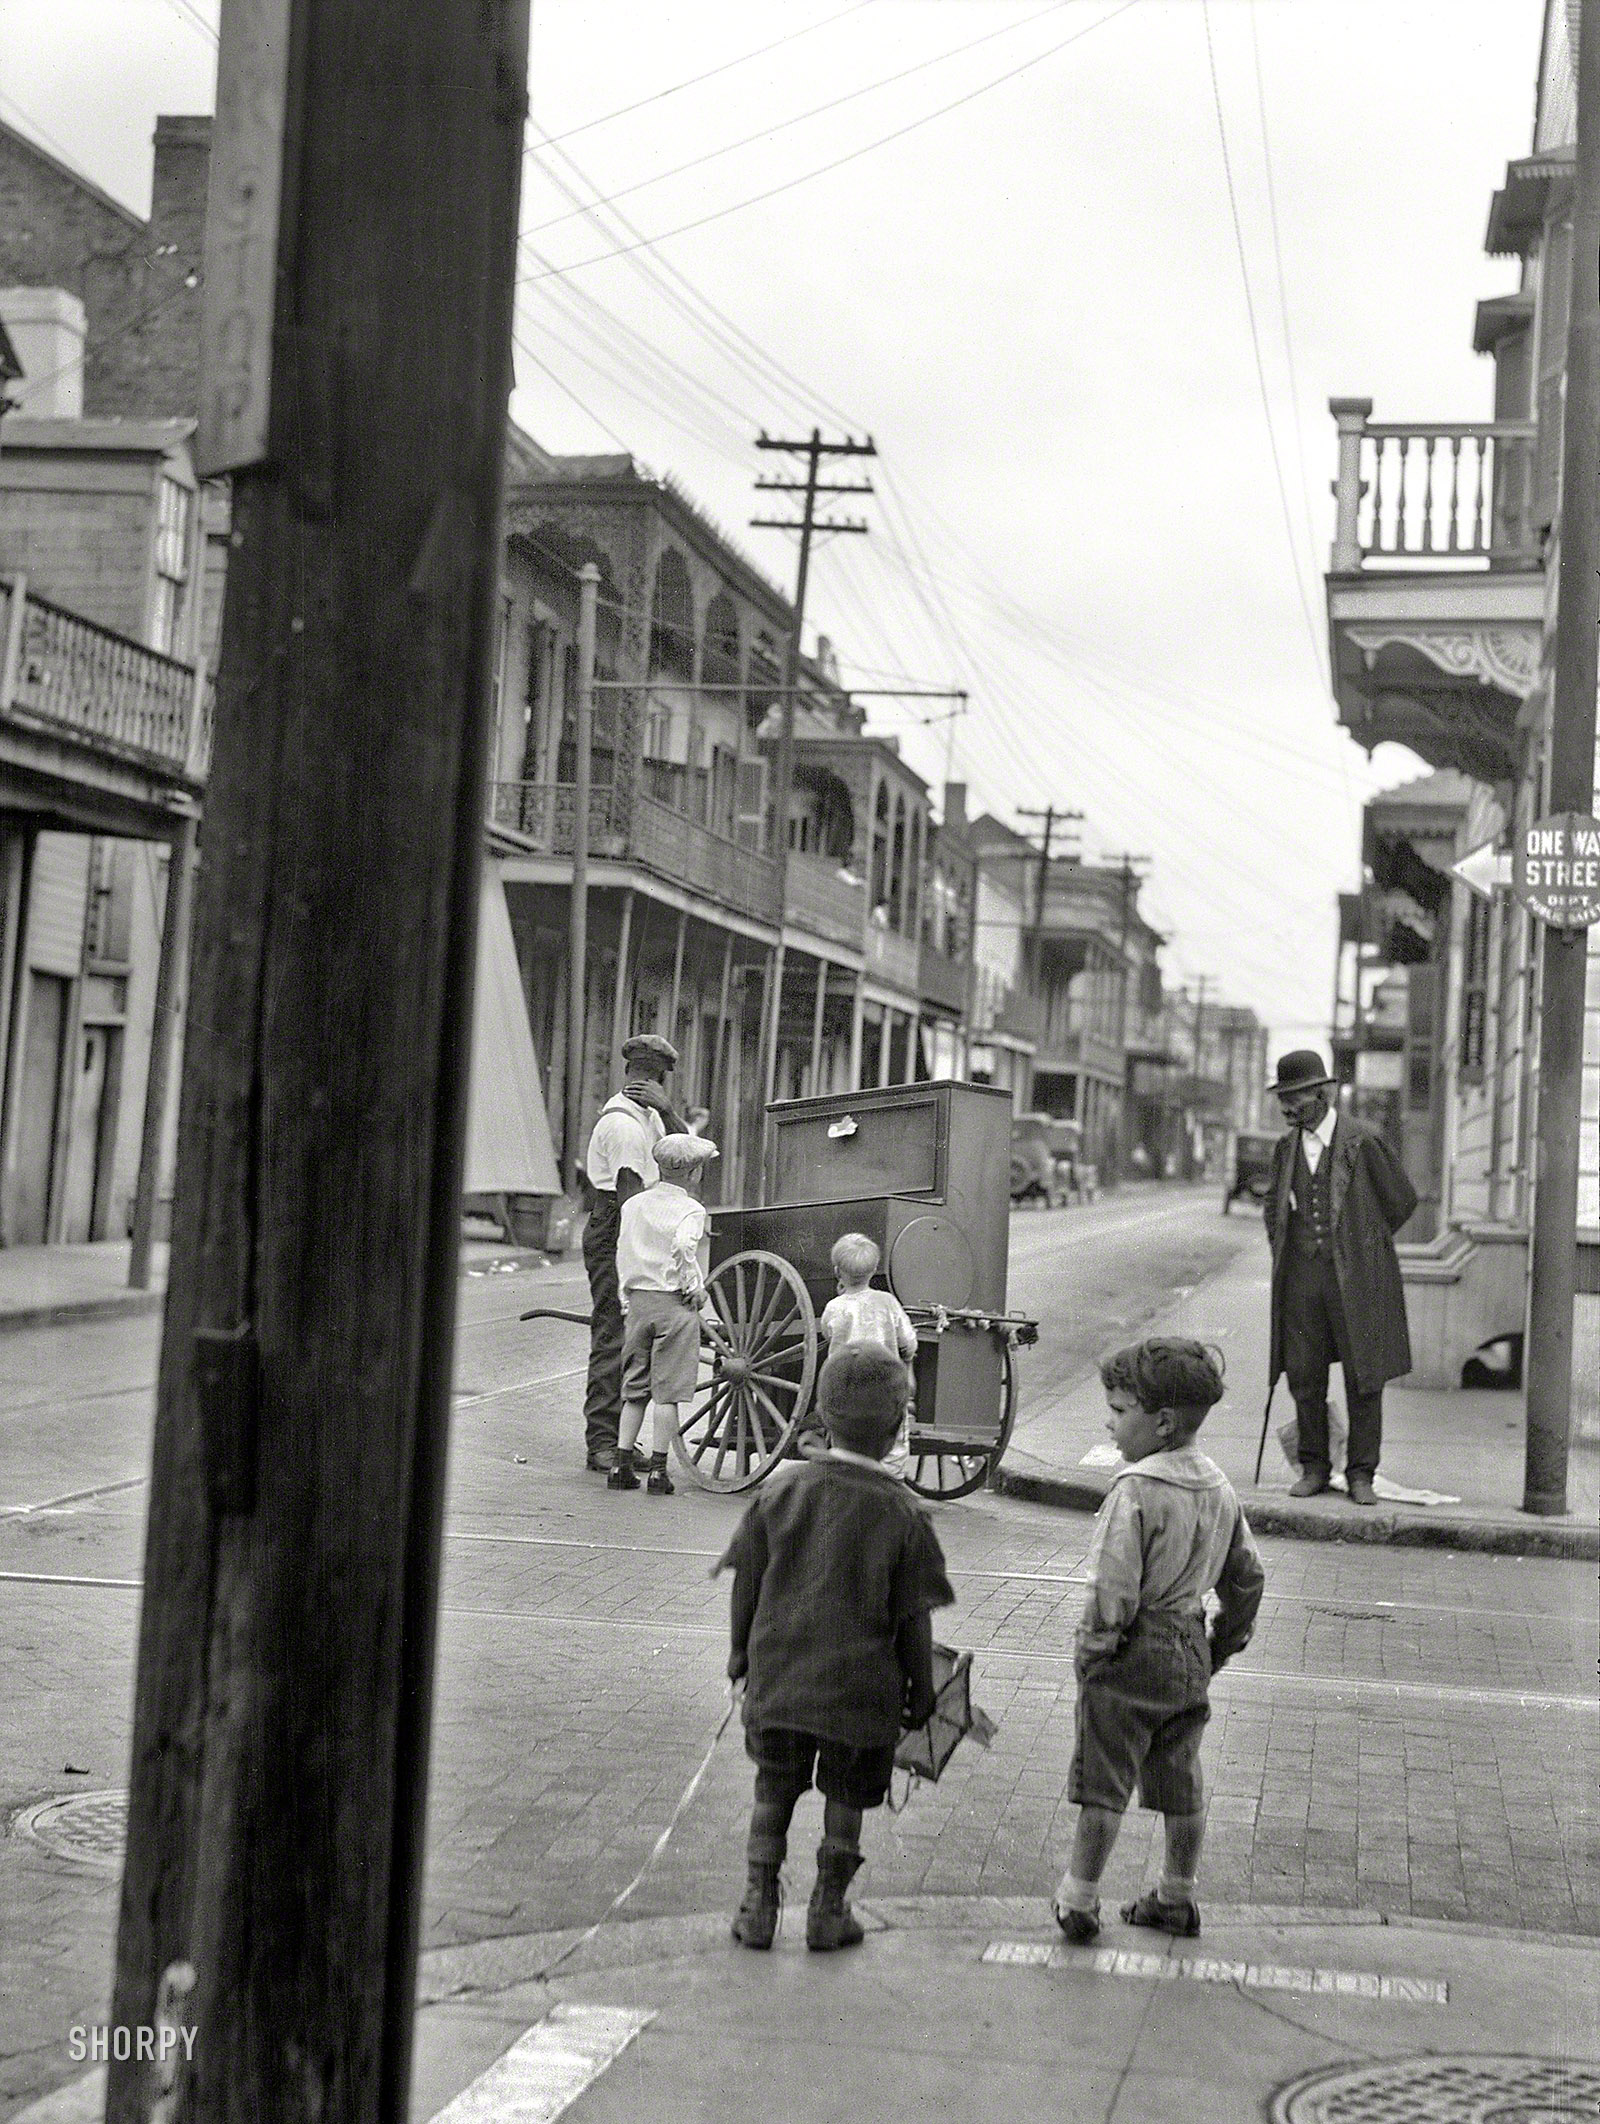 Bourbon Street and Ursulines Avenue circa 1924. "New Orleans organ grinder." Nitrate negative by Arnold Genthe. View full size.